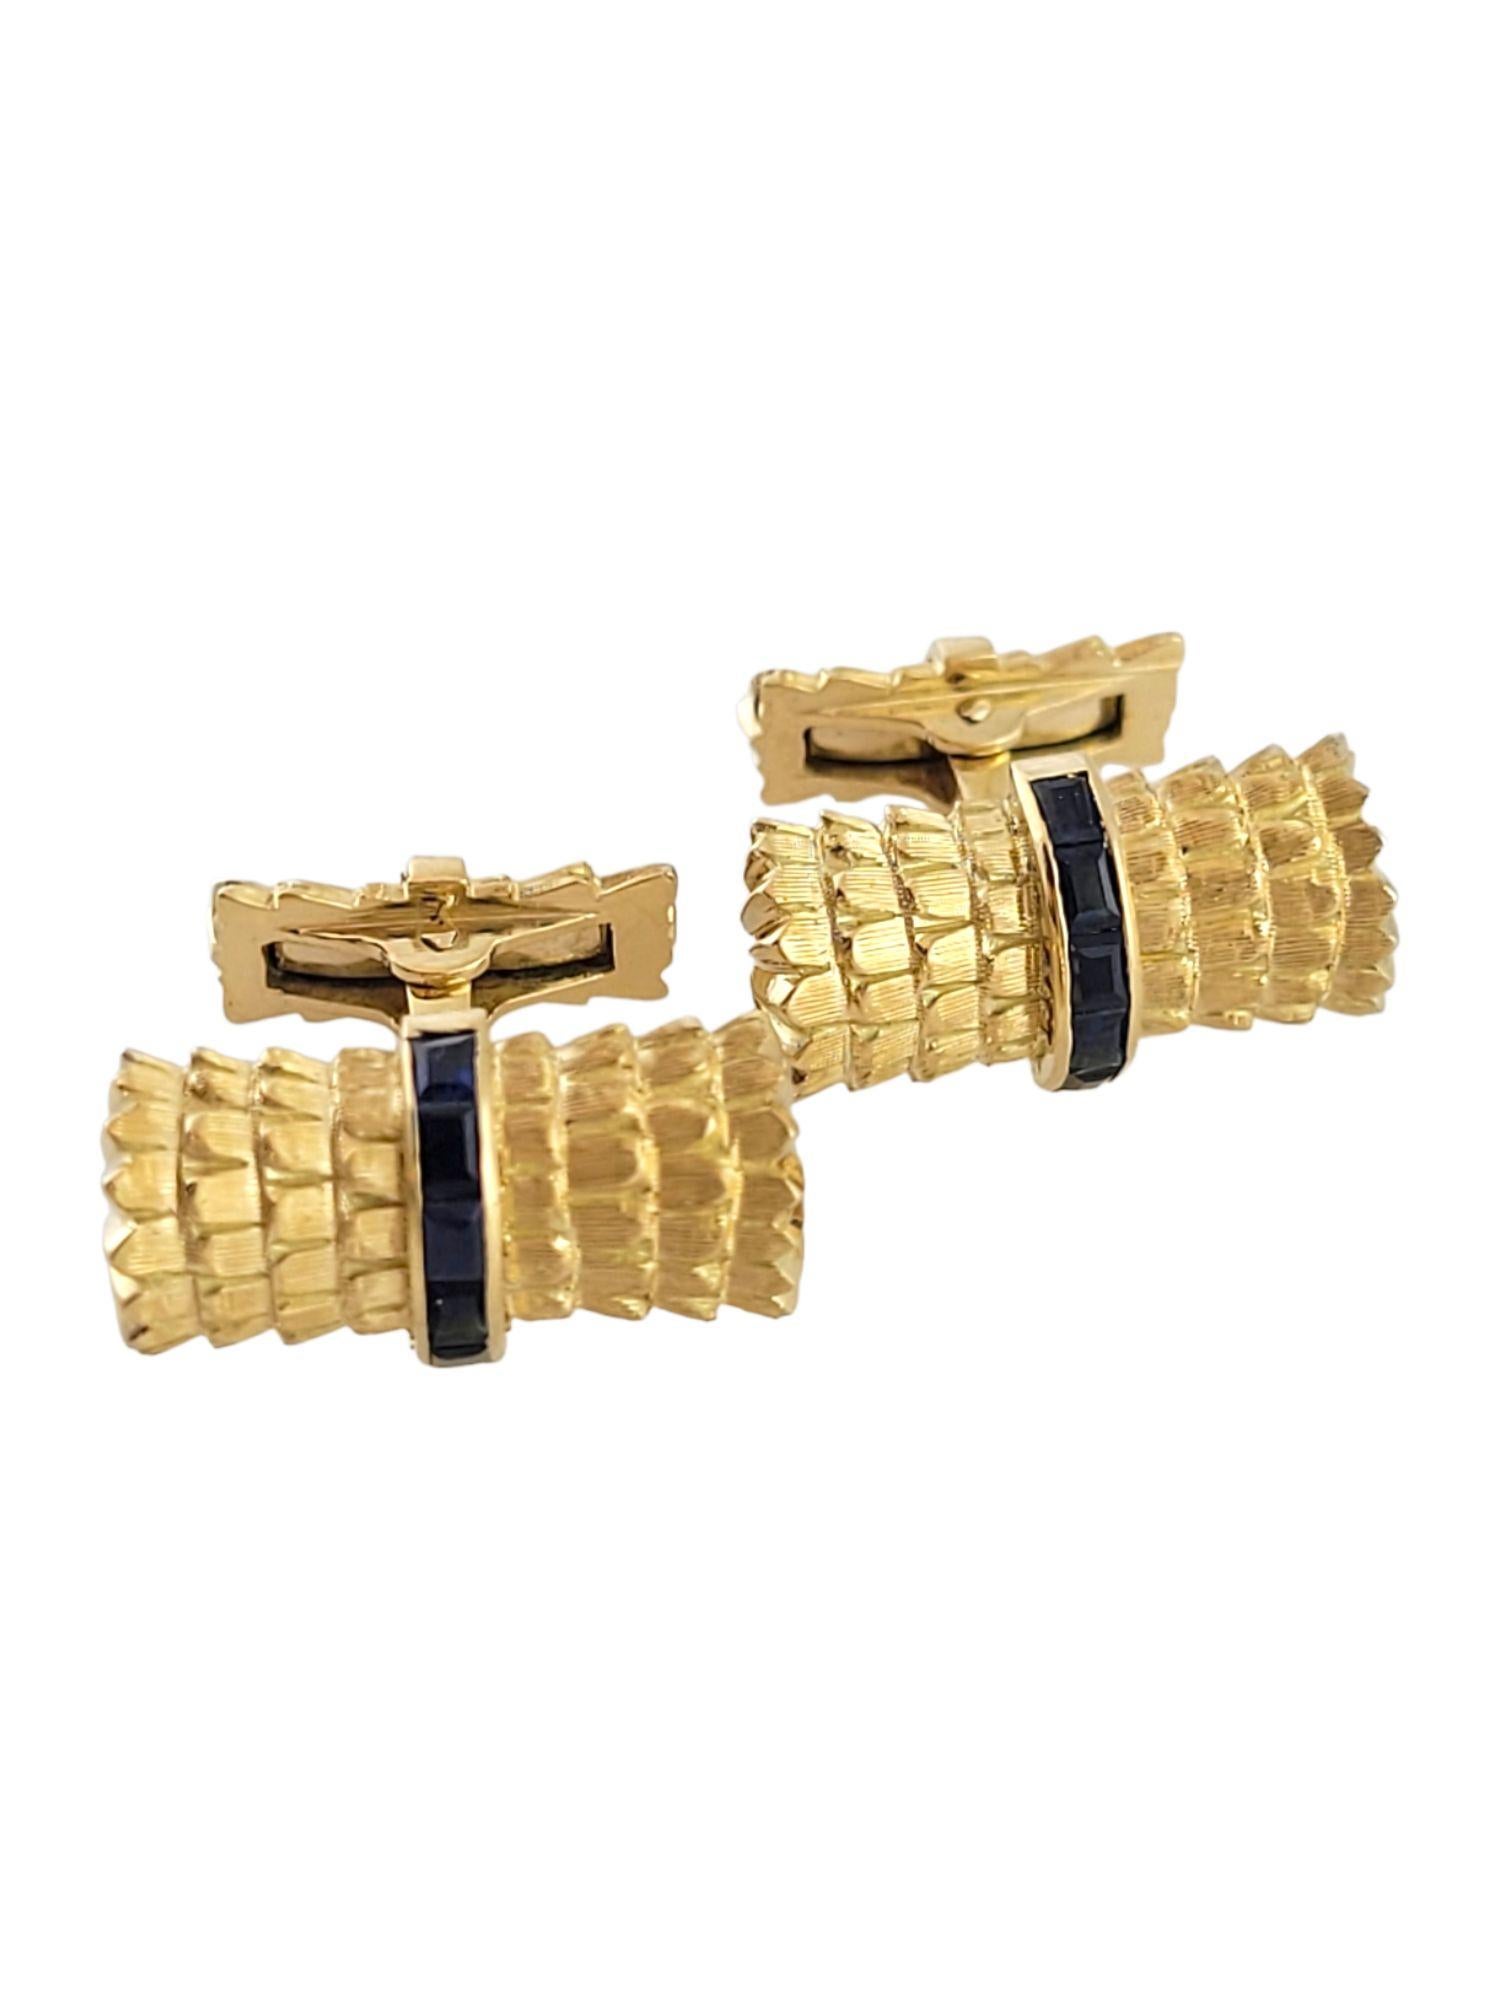 Men's Tiffany & Co 18K Yellow Gold & Sapphire Cufflink and Stud Set #14812 For Sale